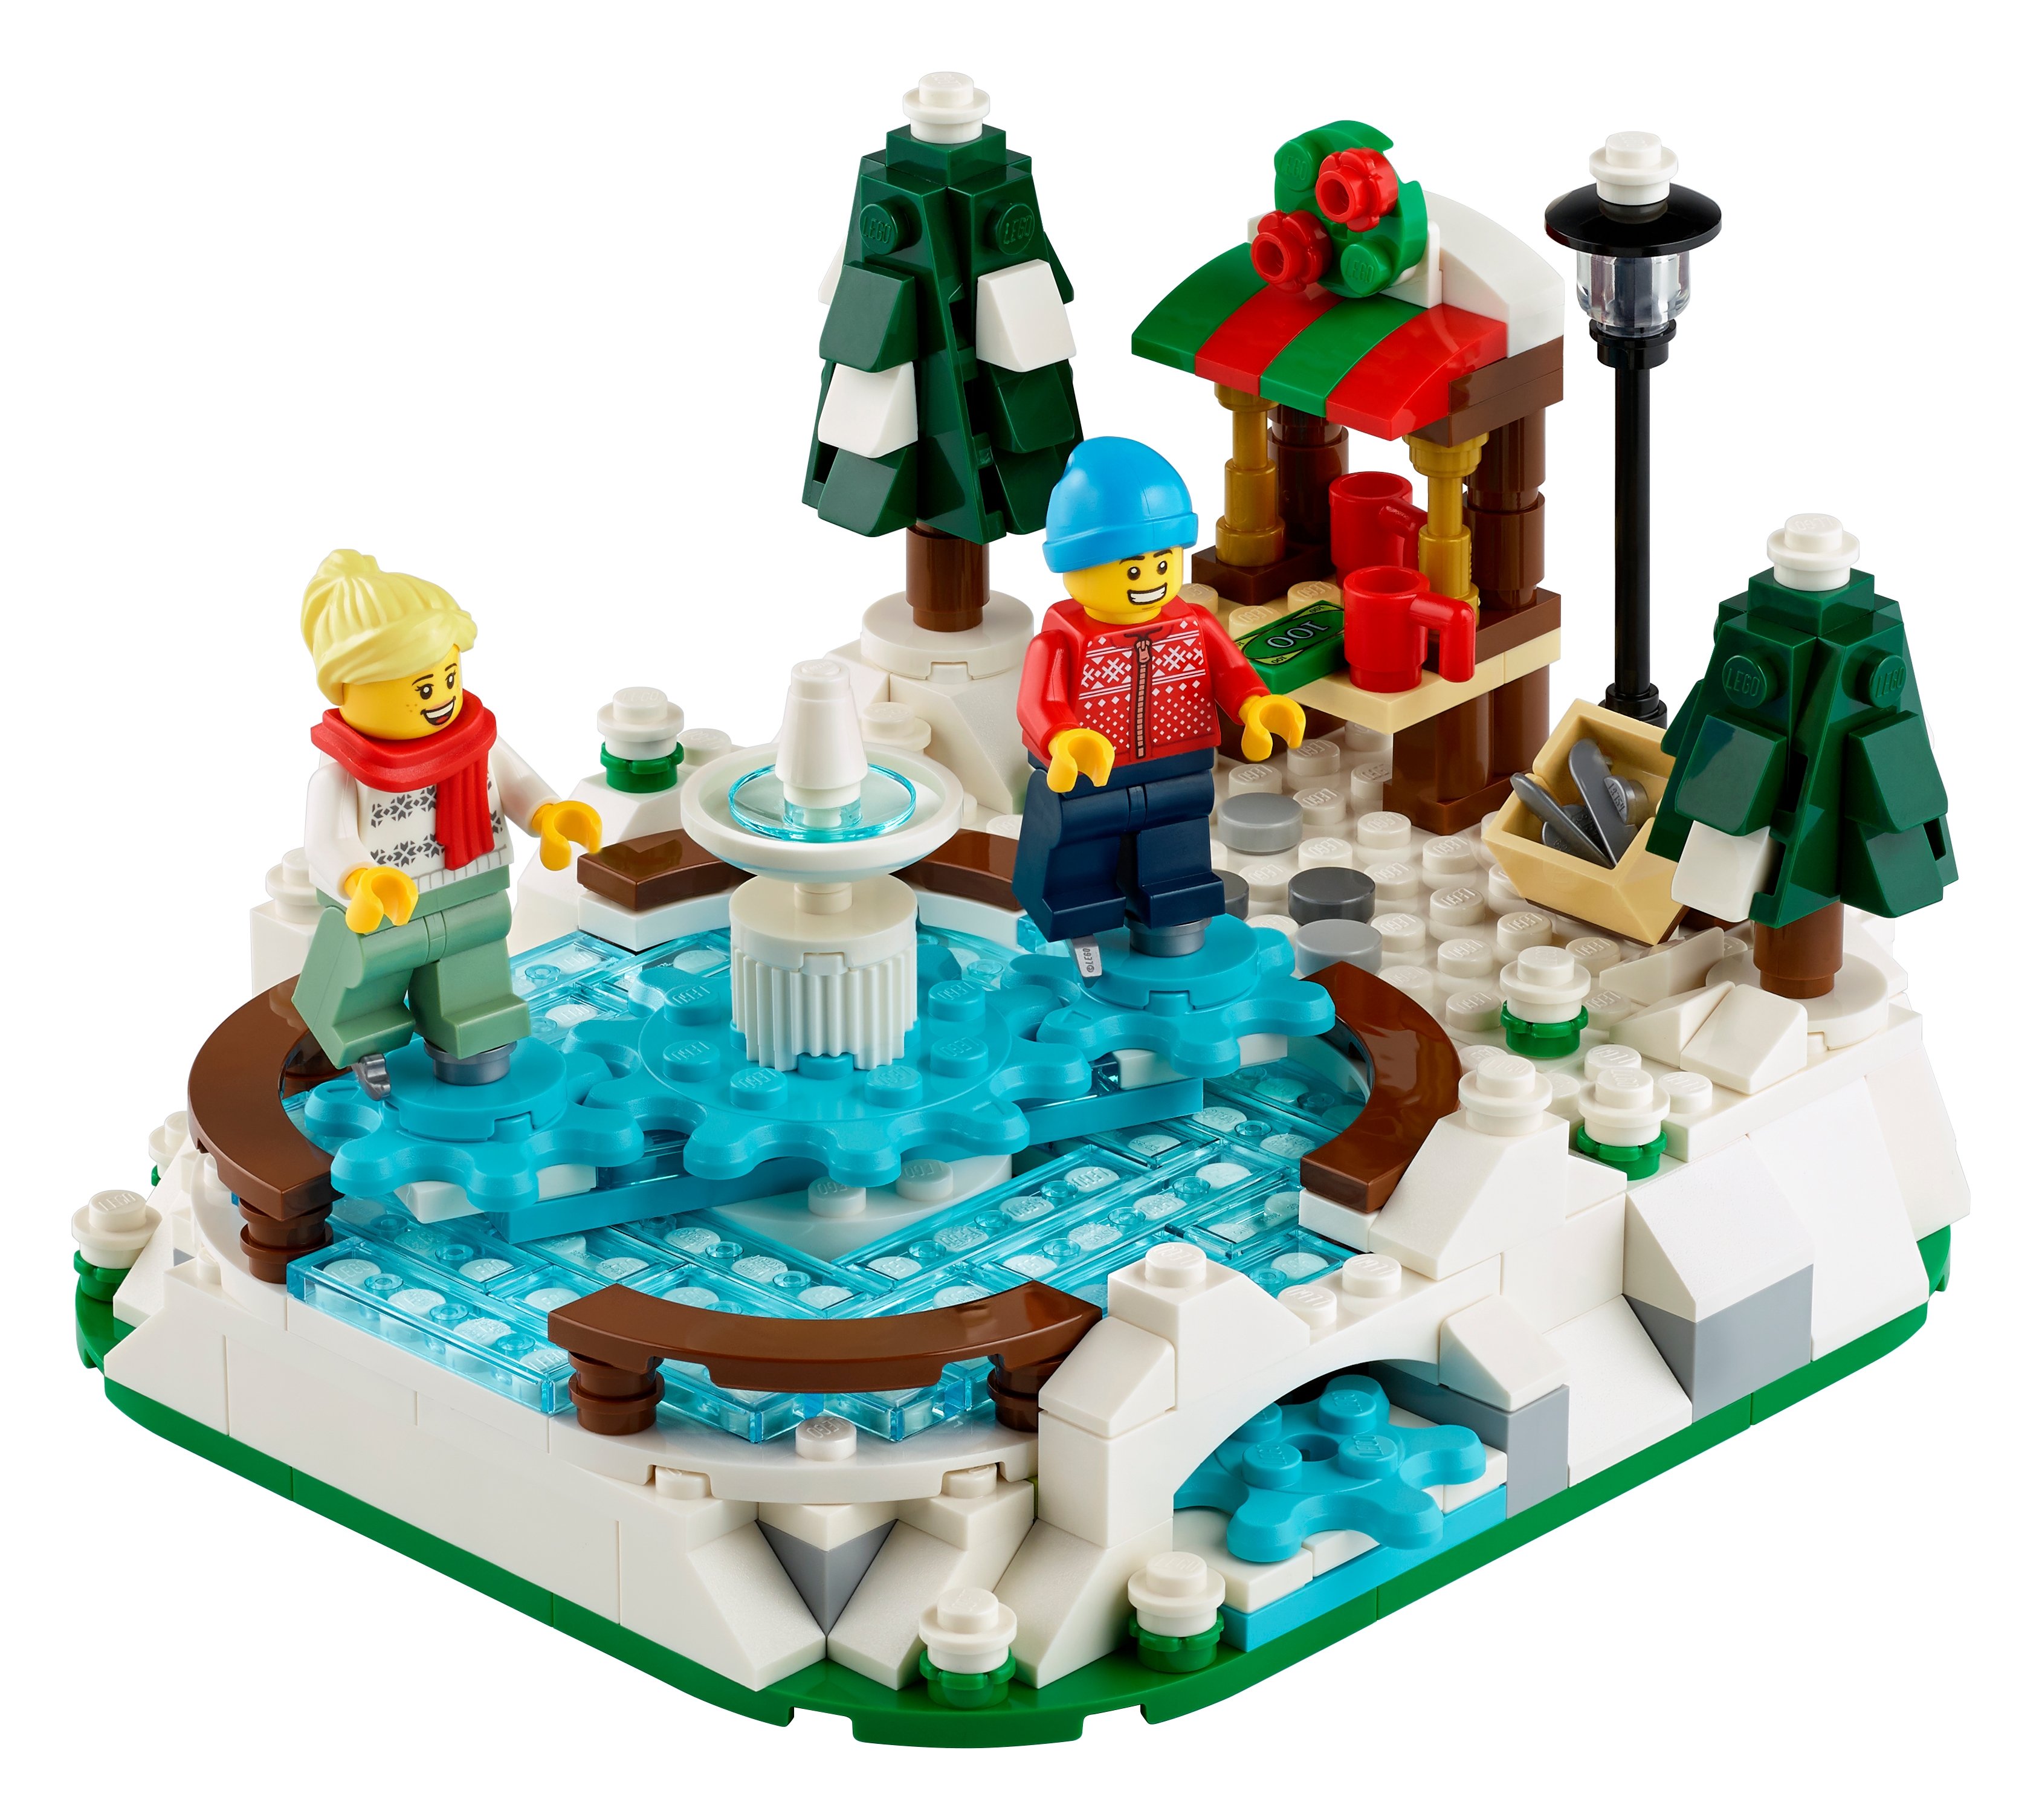 Ice Skating Rink 40416 | Other | Buy online at the Official LEGO® Shop US